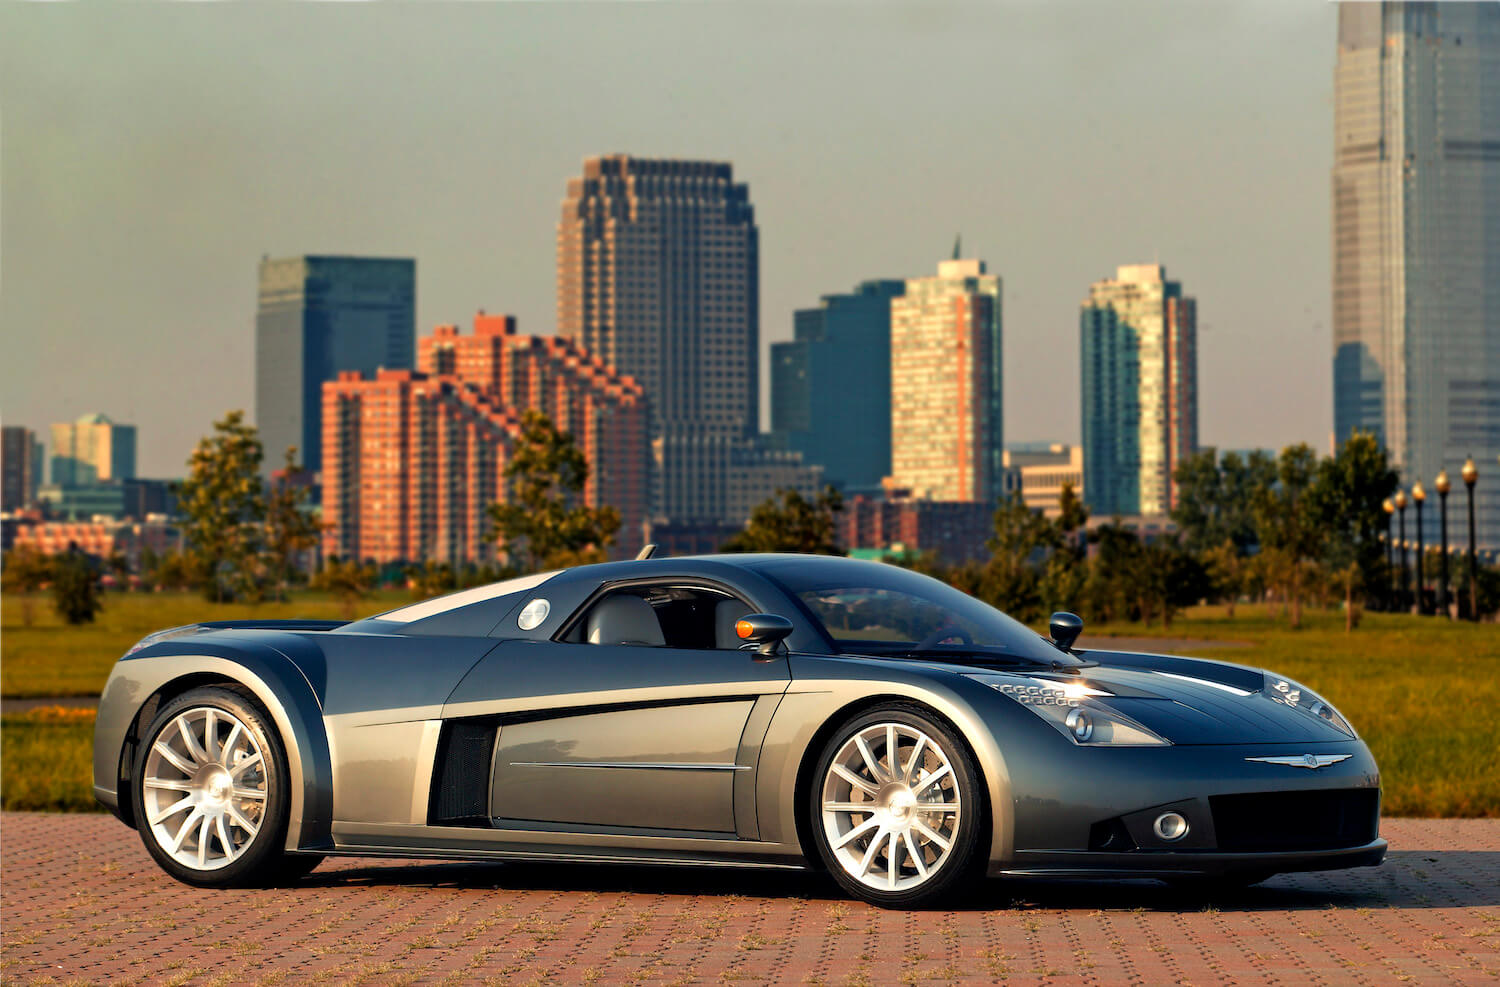 A two seat, mid-engine supercar concept by Chrysler is parked on a cobblestone street, a city's skyline visible in the background.